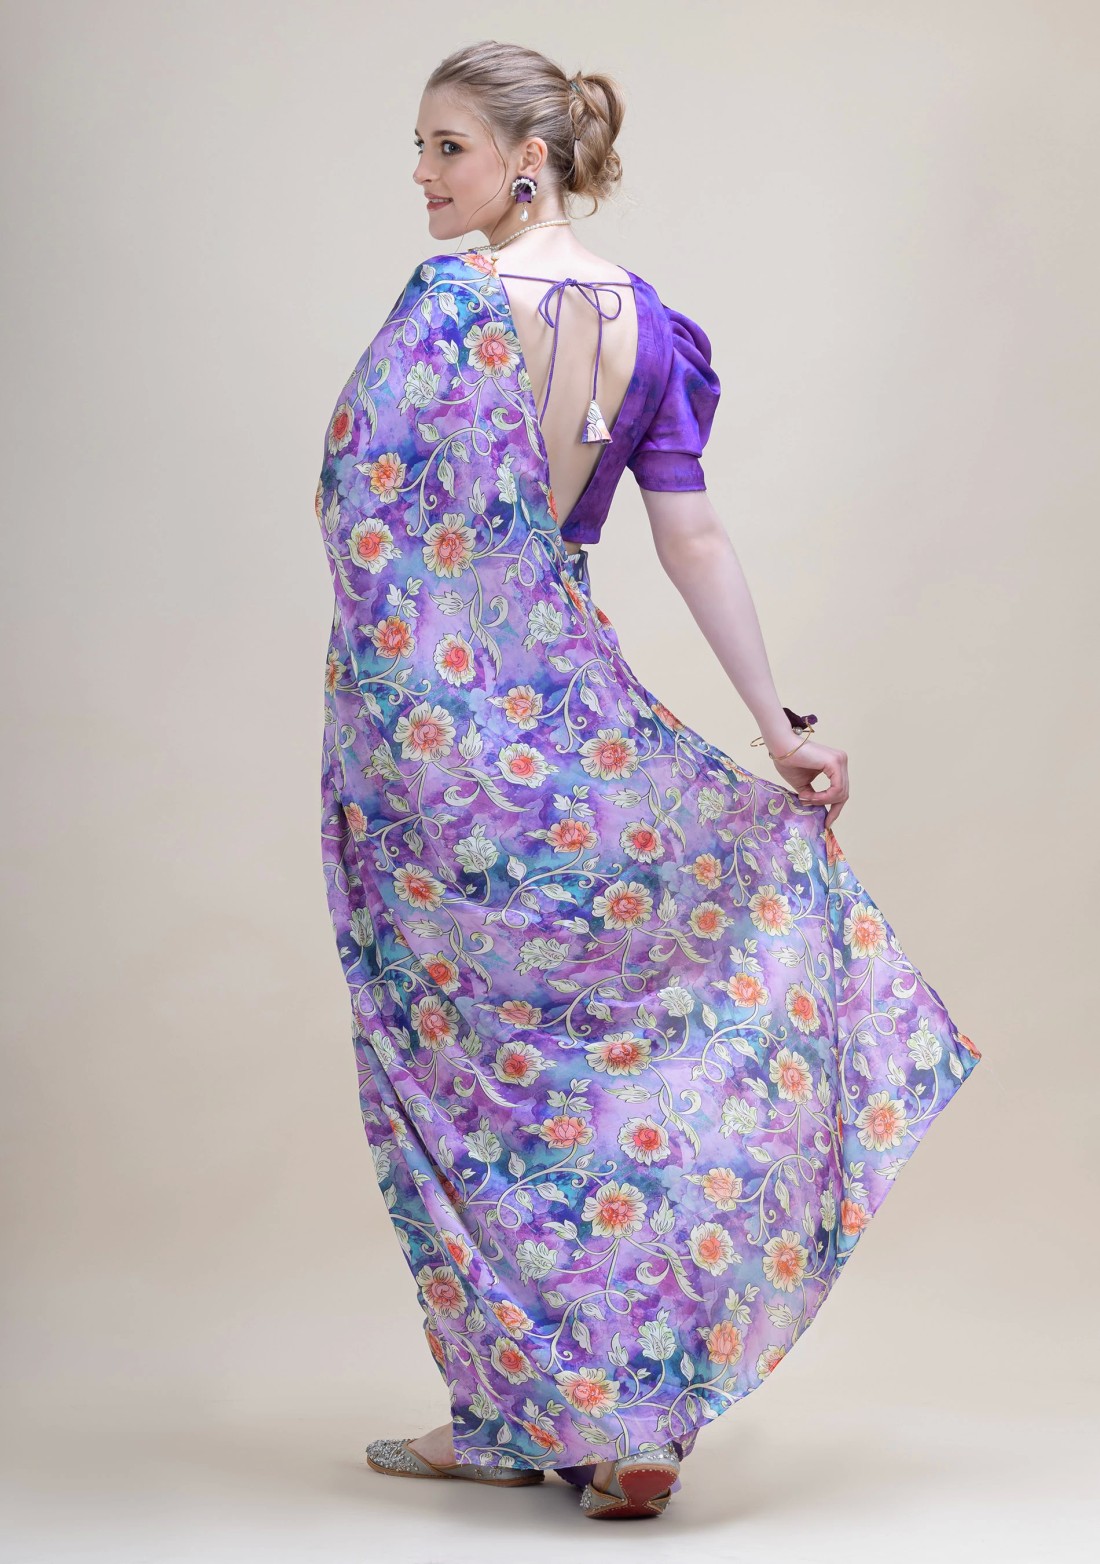 Purple Floral Printed Lightweight Satin Georgette Saree With Unstitched Blouse